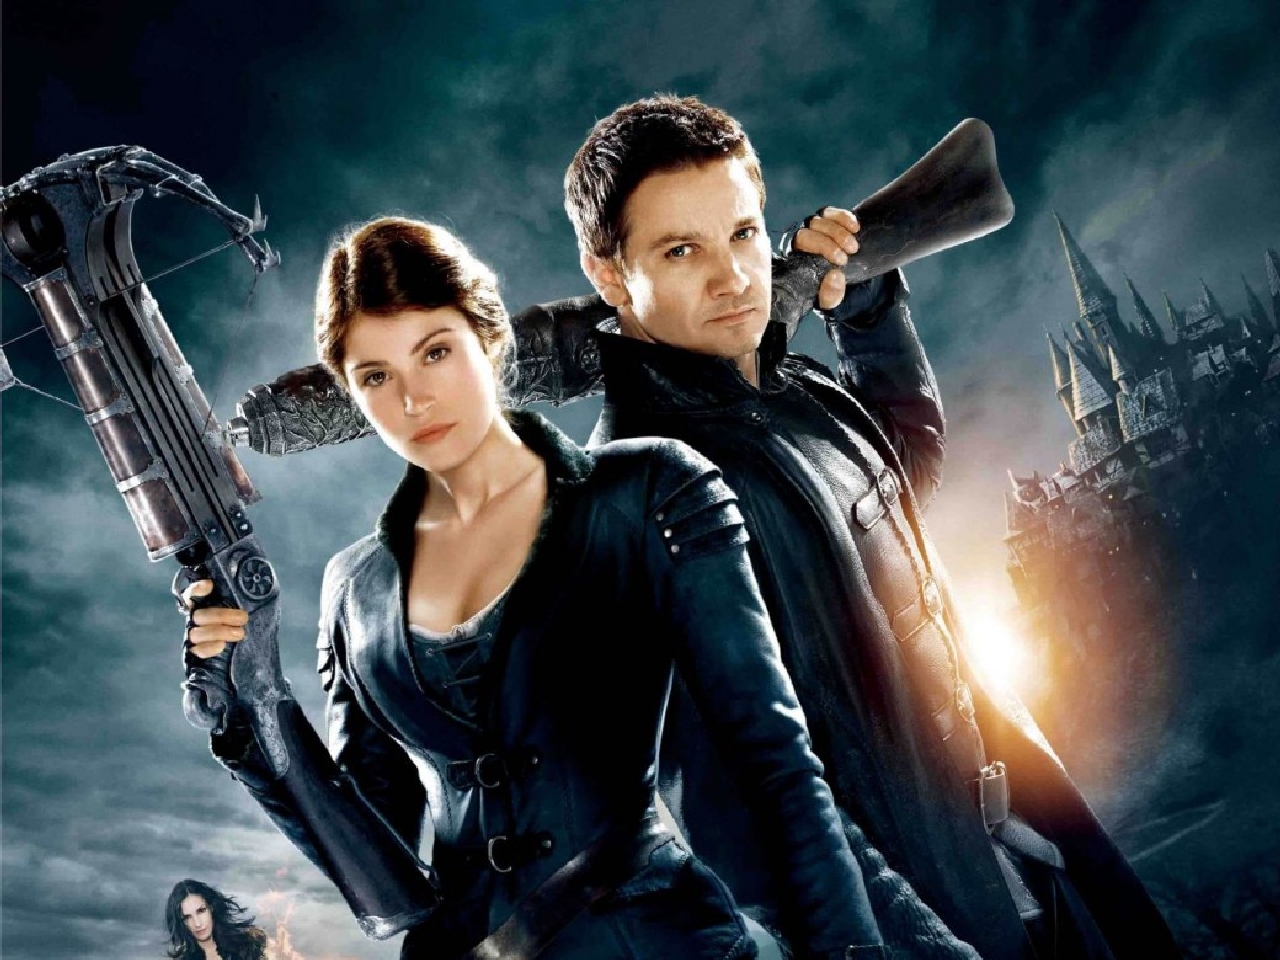 Hansel And Gretel Witch Hunters 2 Full Movie Free Download In 11